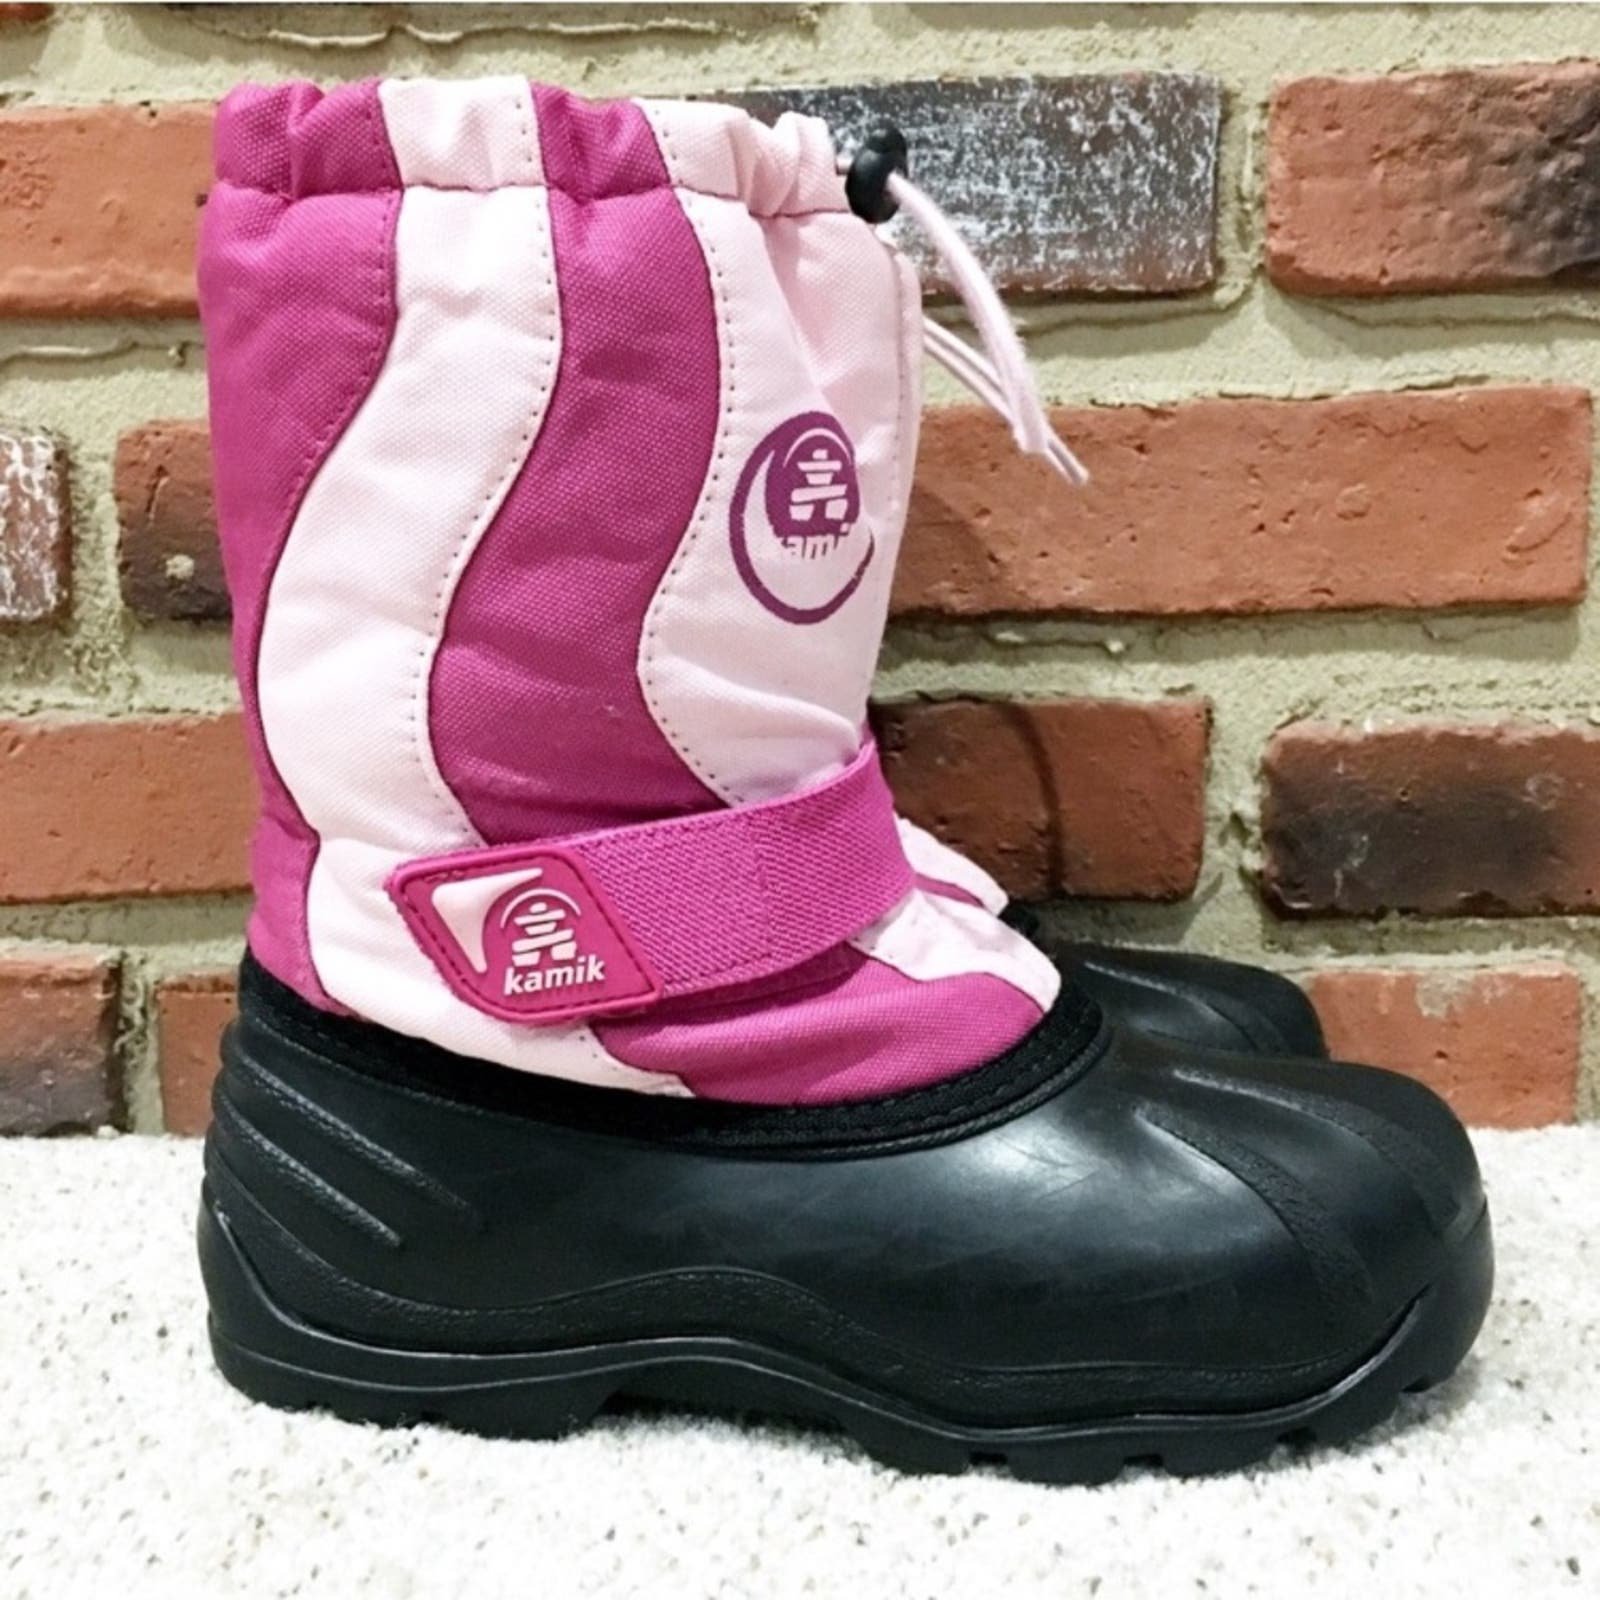 Girls Kamik Snow Boots Sz 4 Youth Waterproof Boots Insulated Pull On High 4xKUolgqN